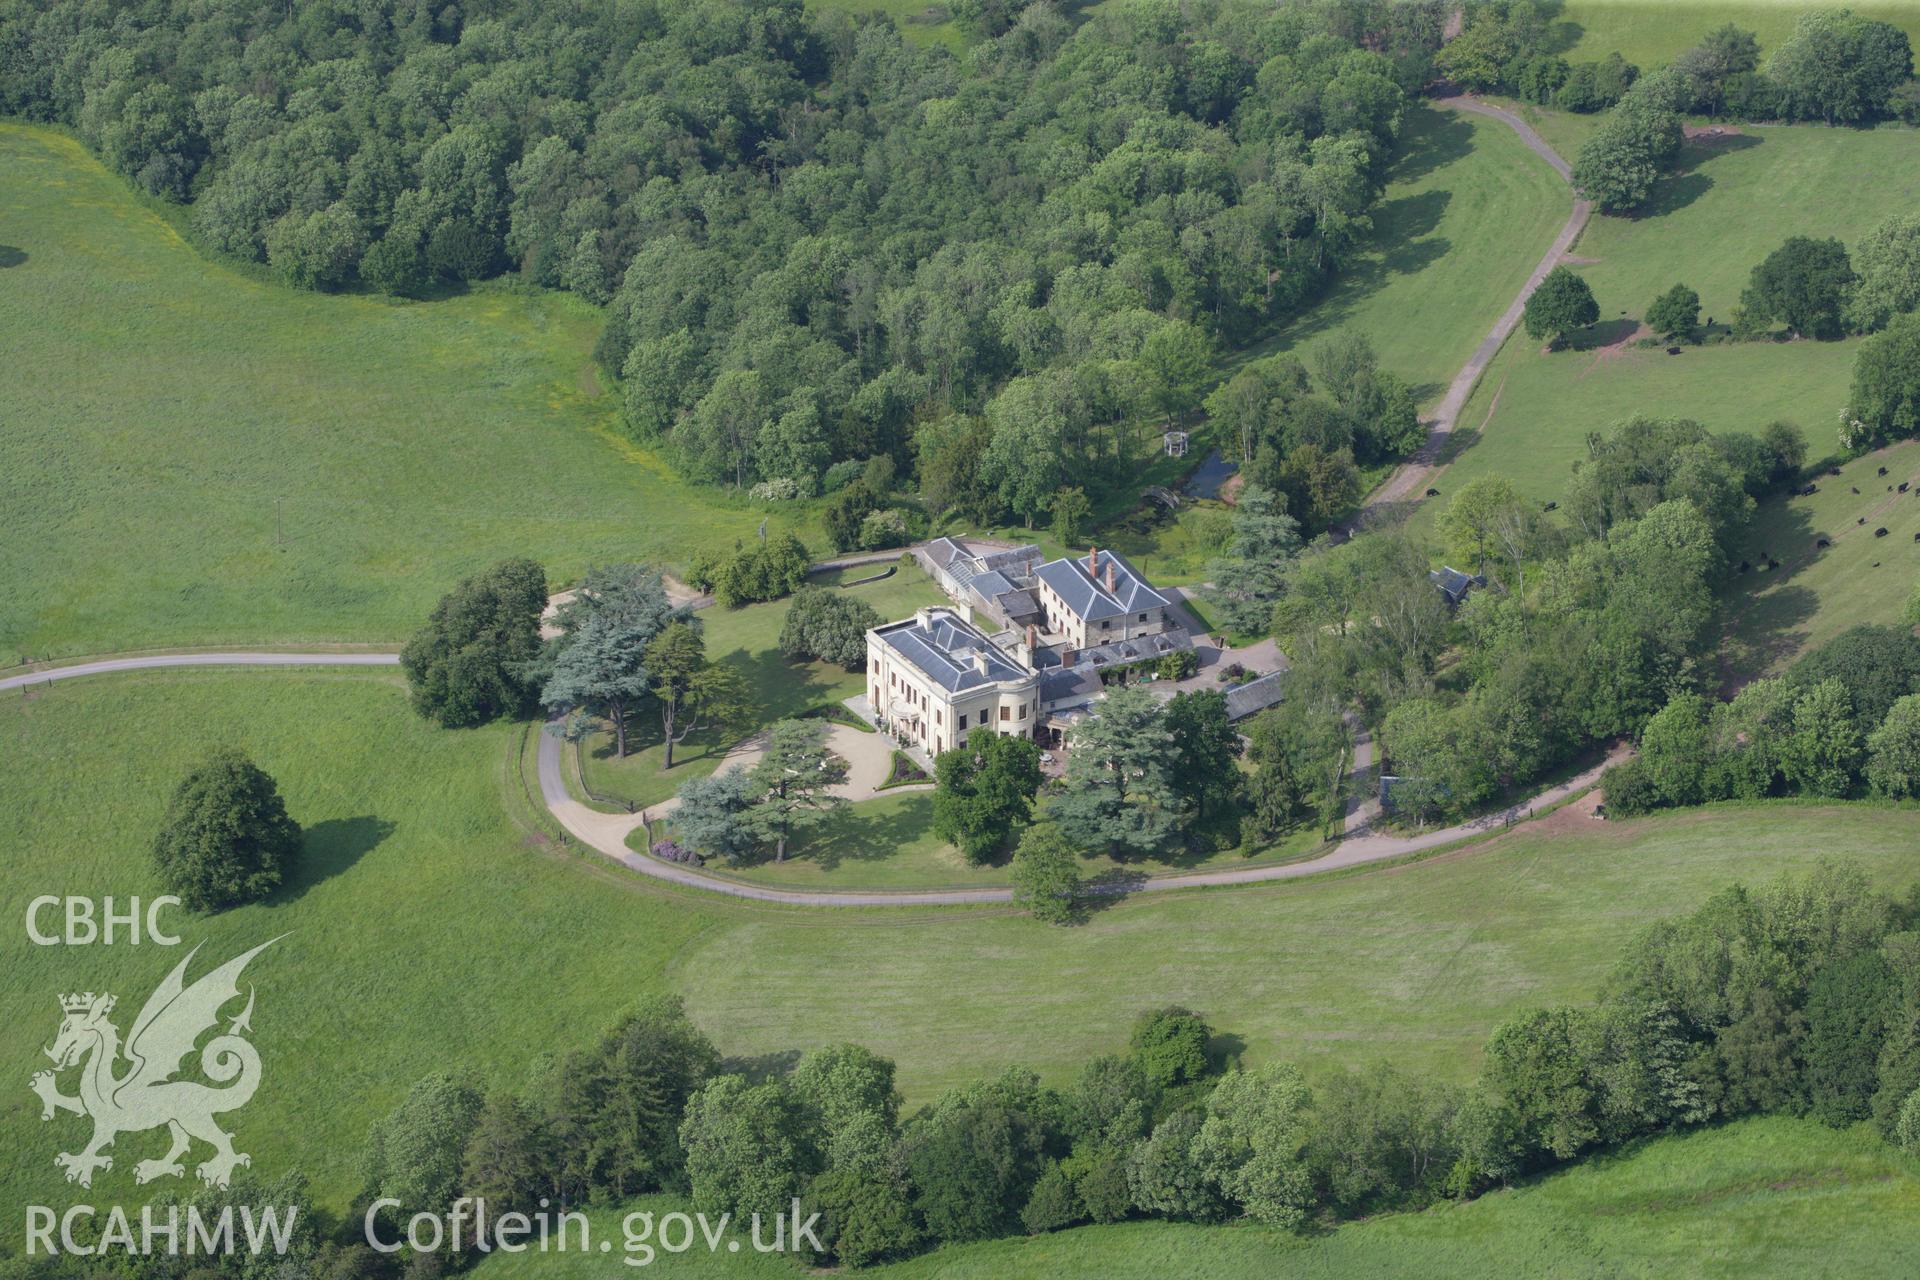 RCAHMW colour oblique aerial photograph of Bertholey House, Llantrisant Fawr. Taken on 11 June 2009 by Toby Driver